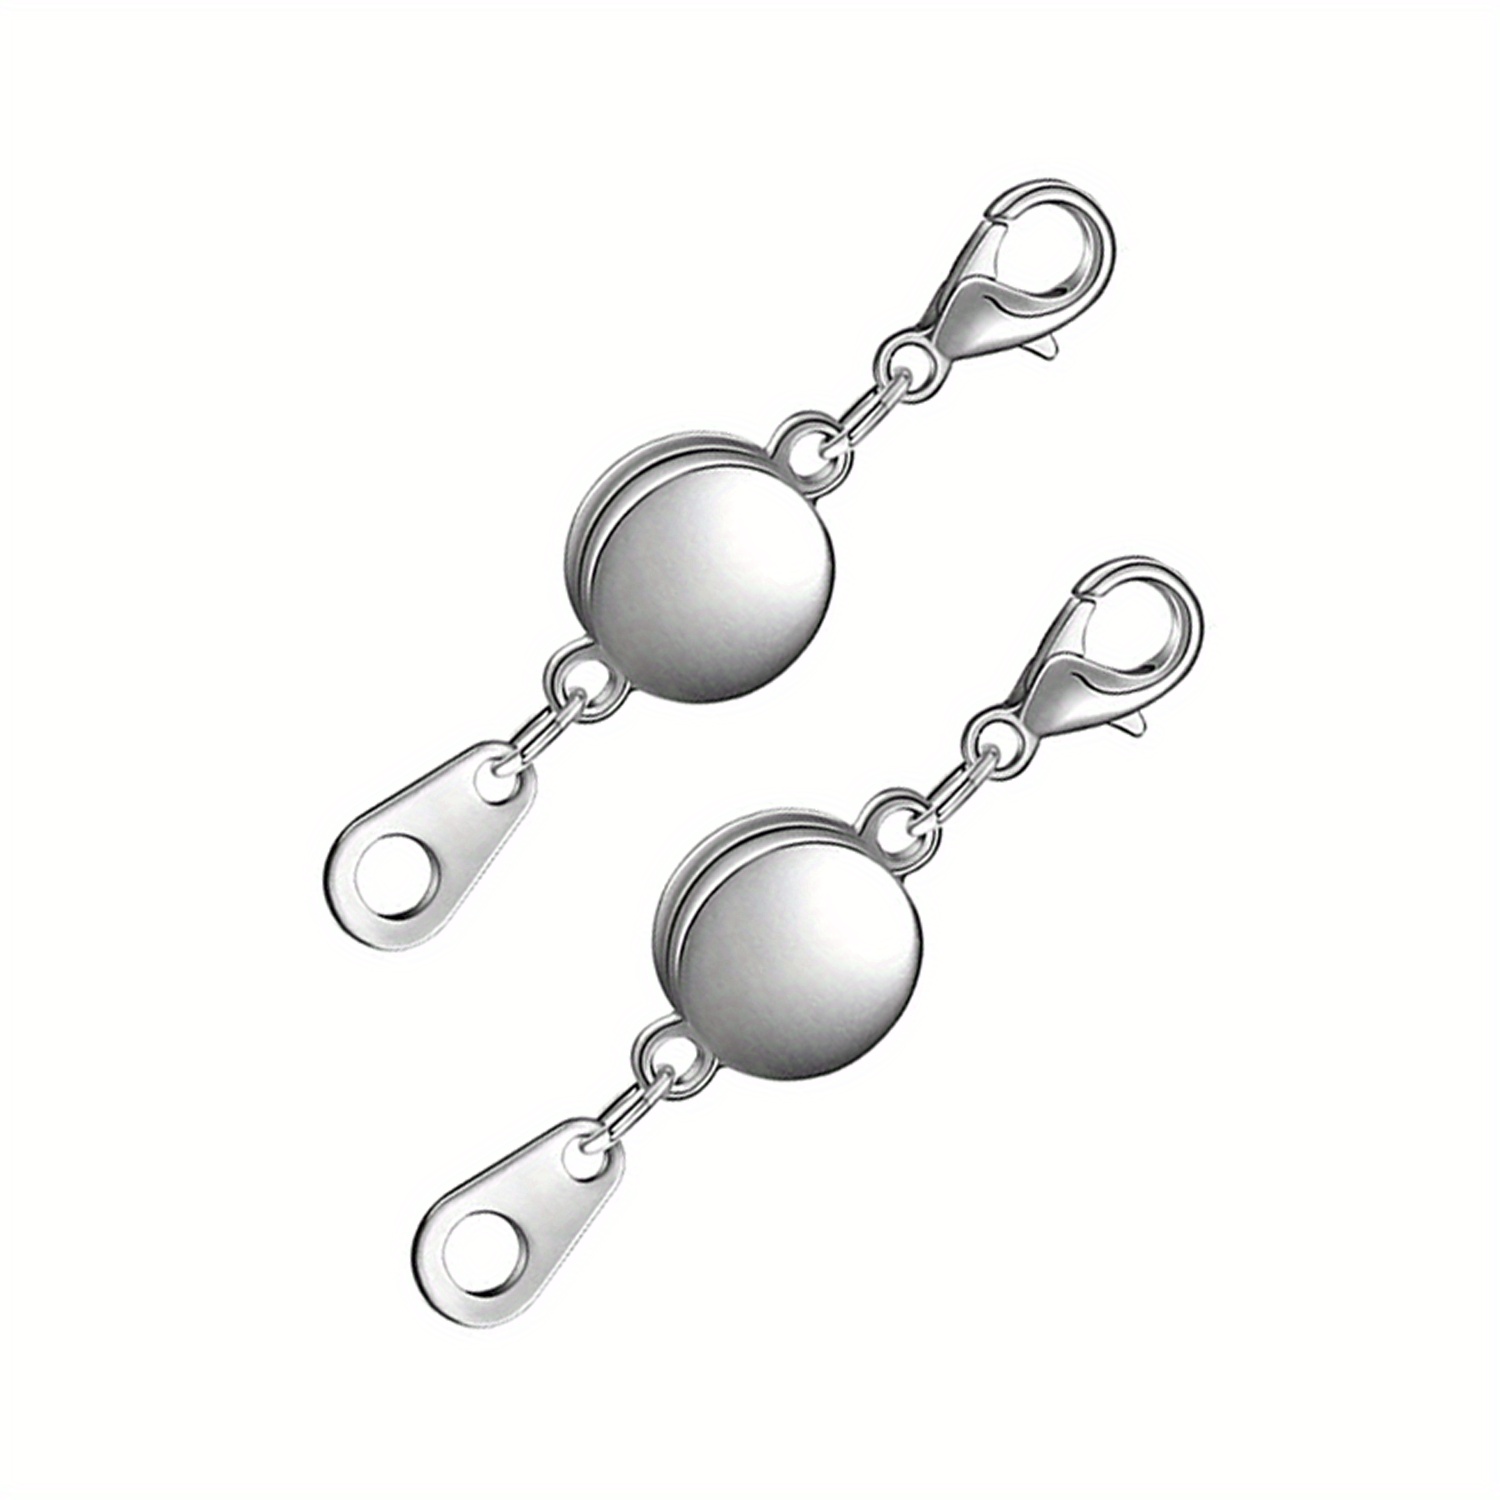 Magnetic Jewelry Clasps, Set of 2